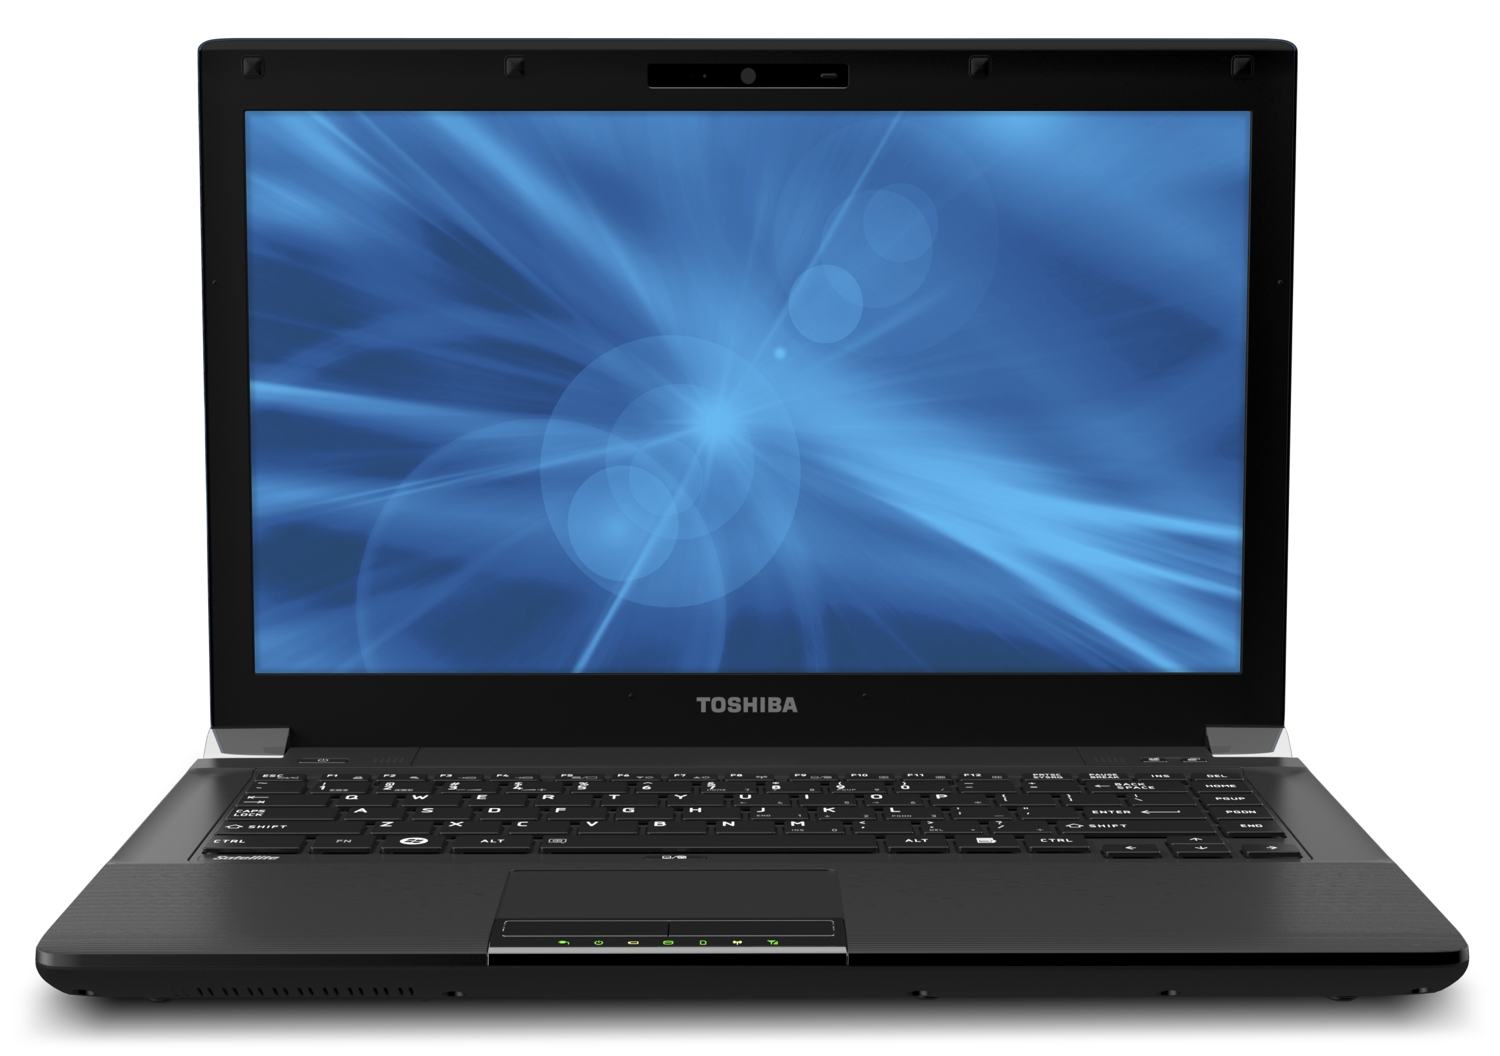 http://thetechjournal.com/wp-content/uploads/images/1202/1330098068-toshiba-satellite-r845s85-140inch-led-laptop-2.jpg